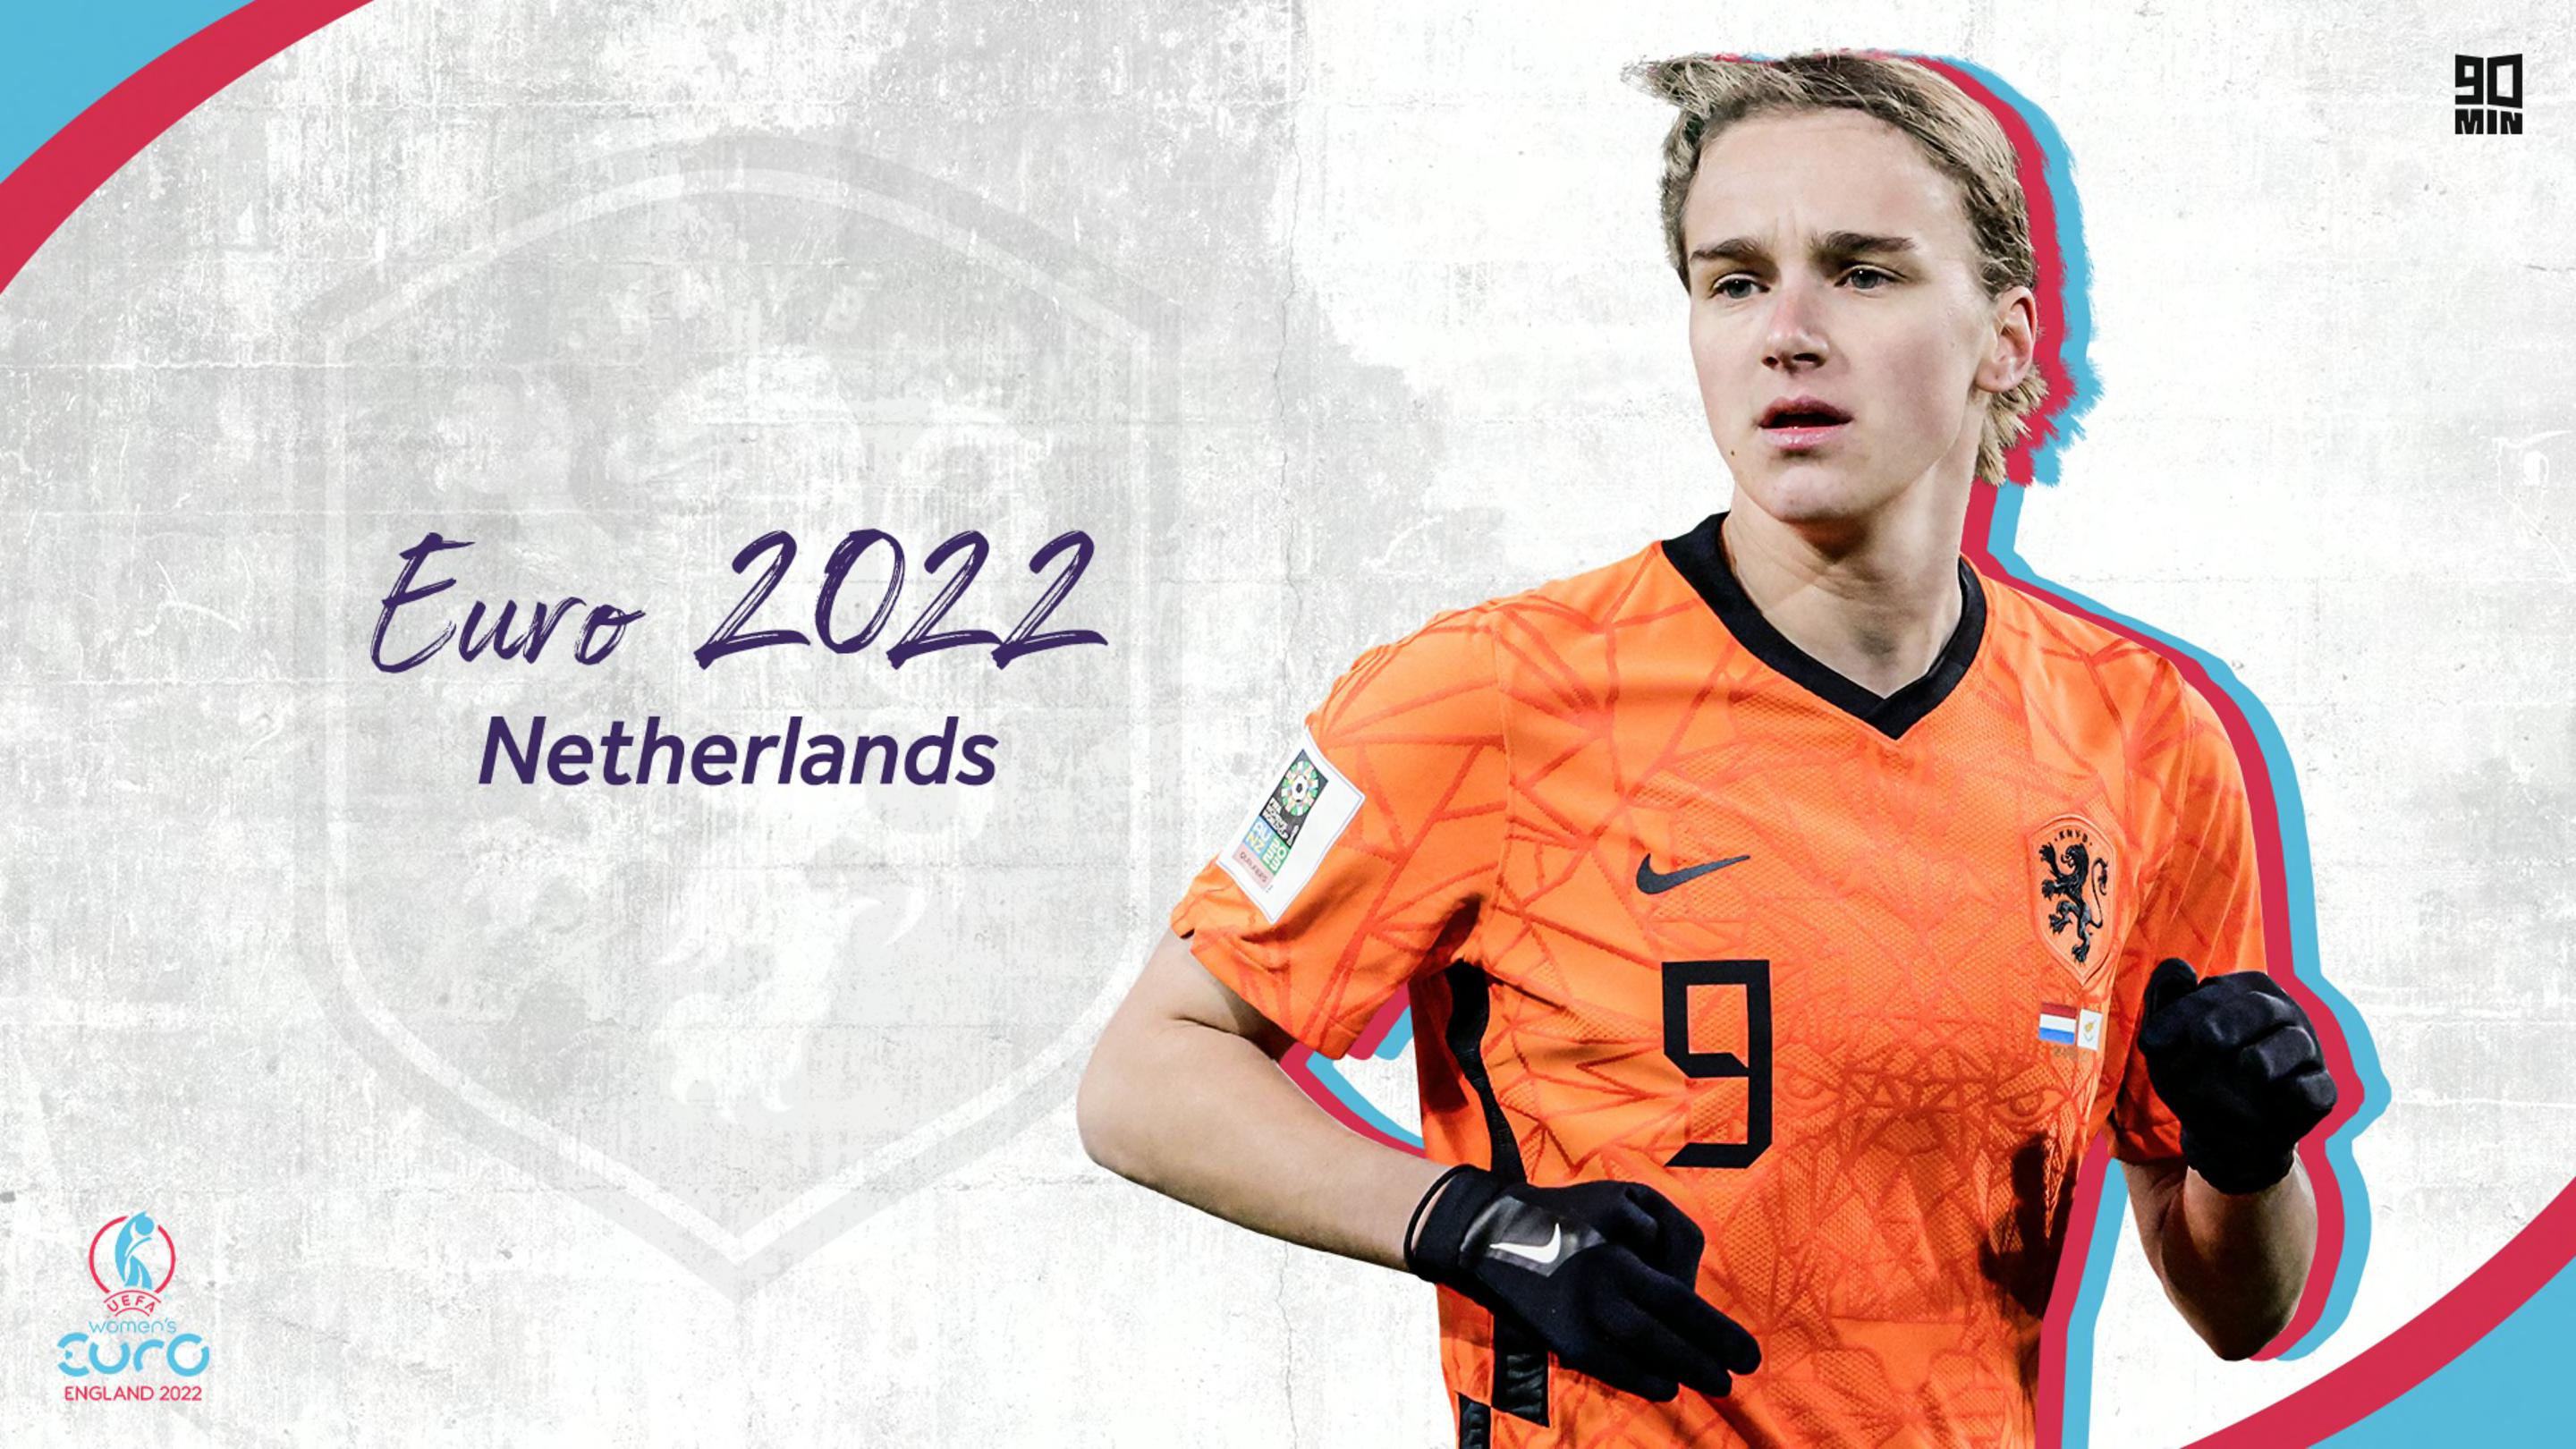 Netherlands Euro 2022 team guide: key players, route to final, tournament history & more